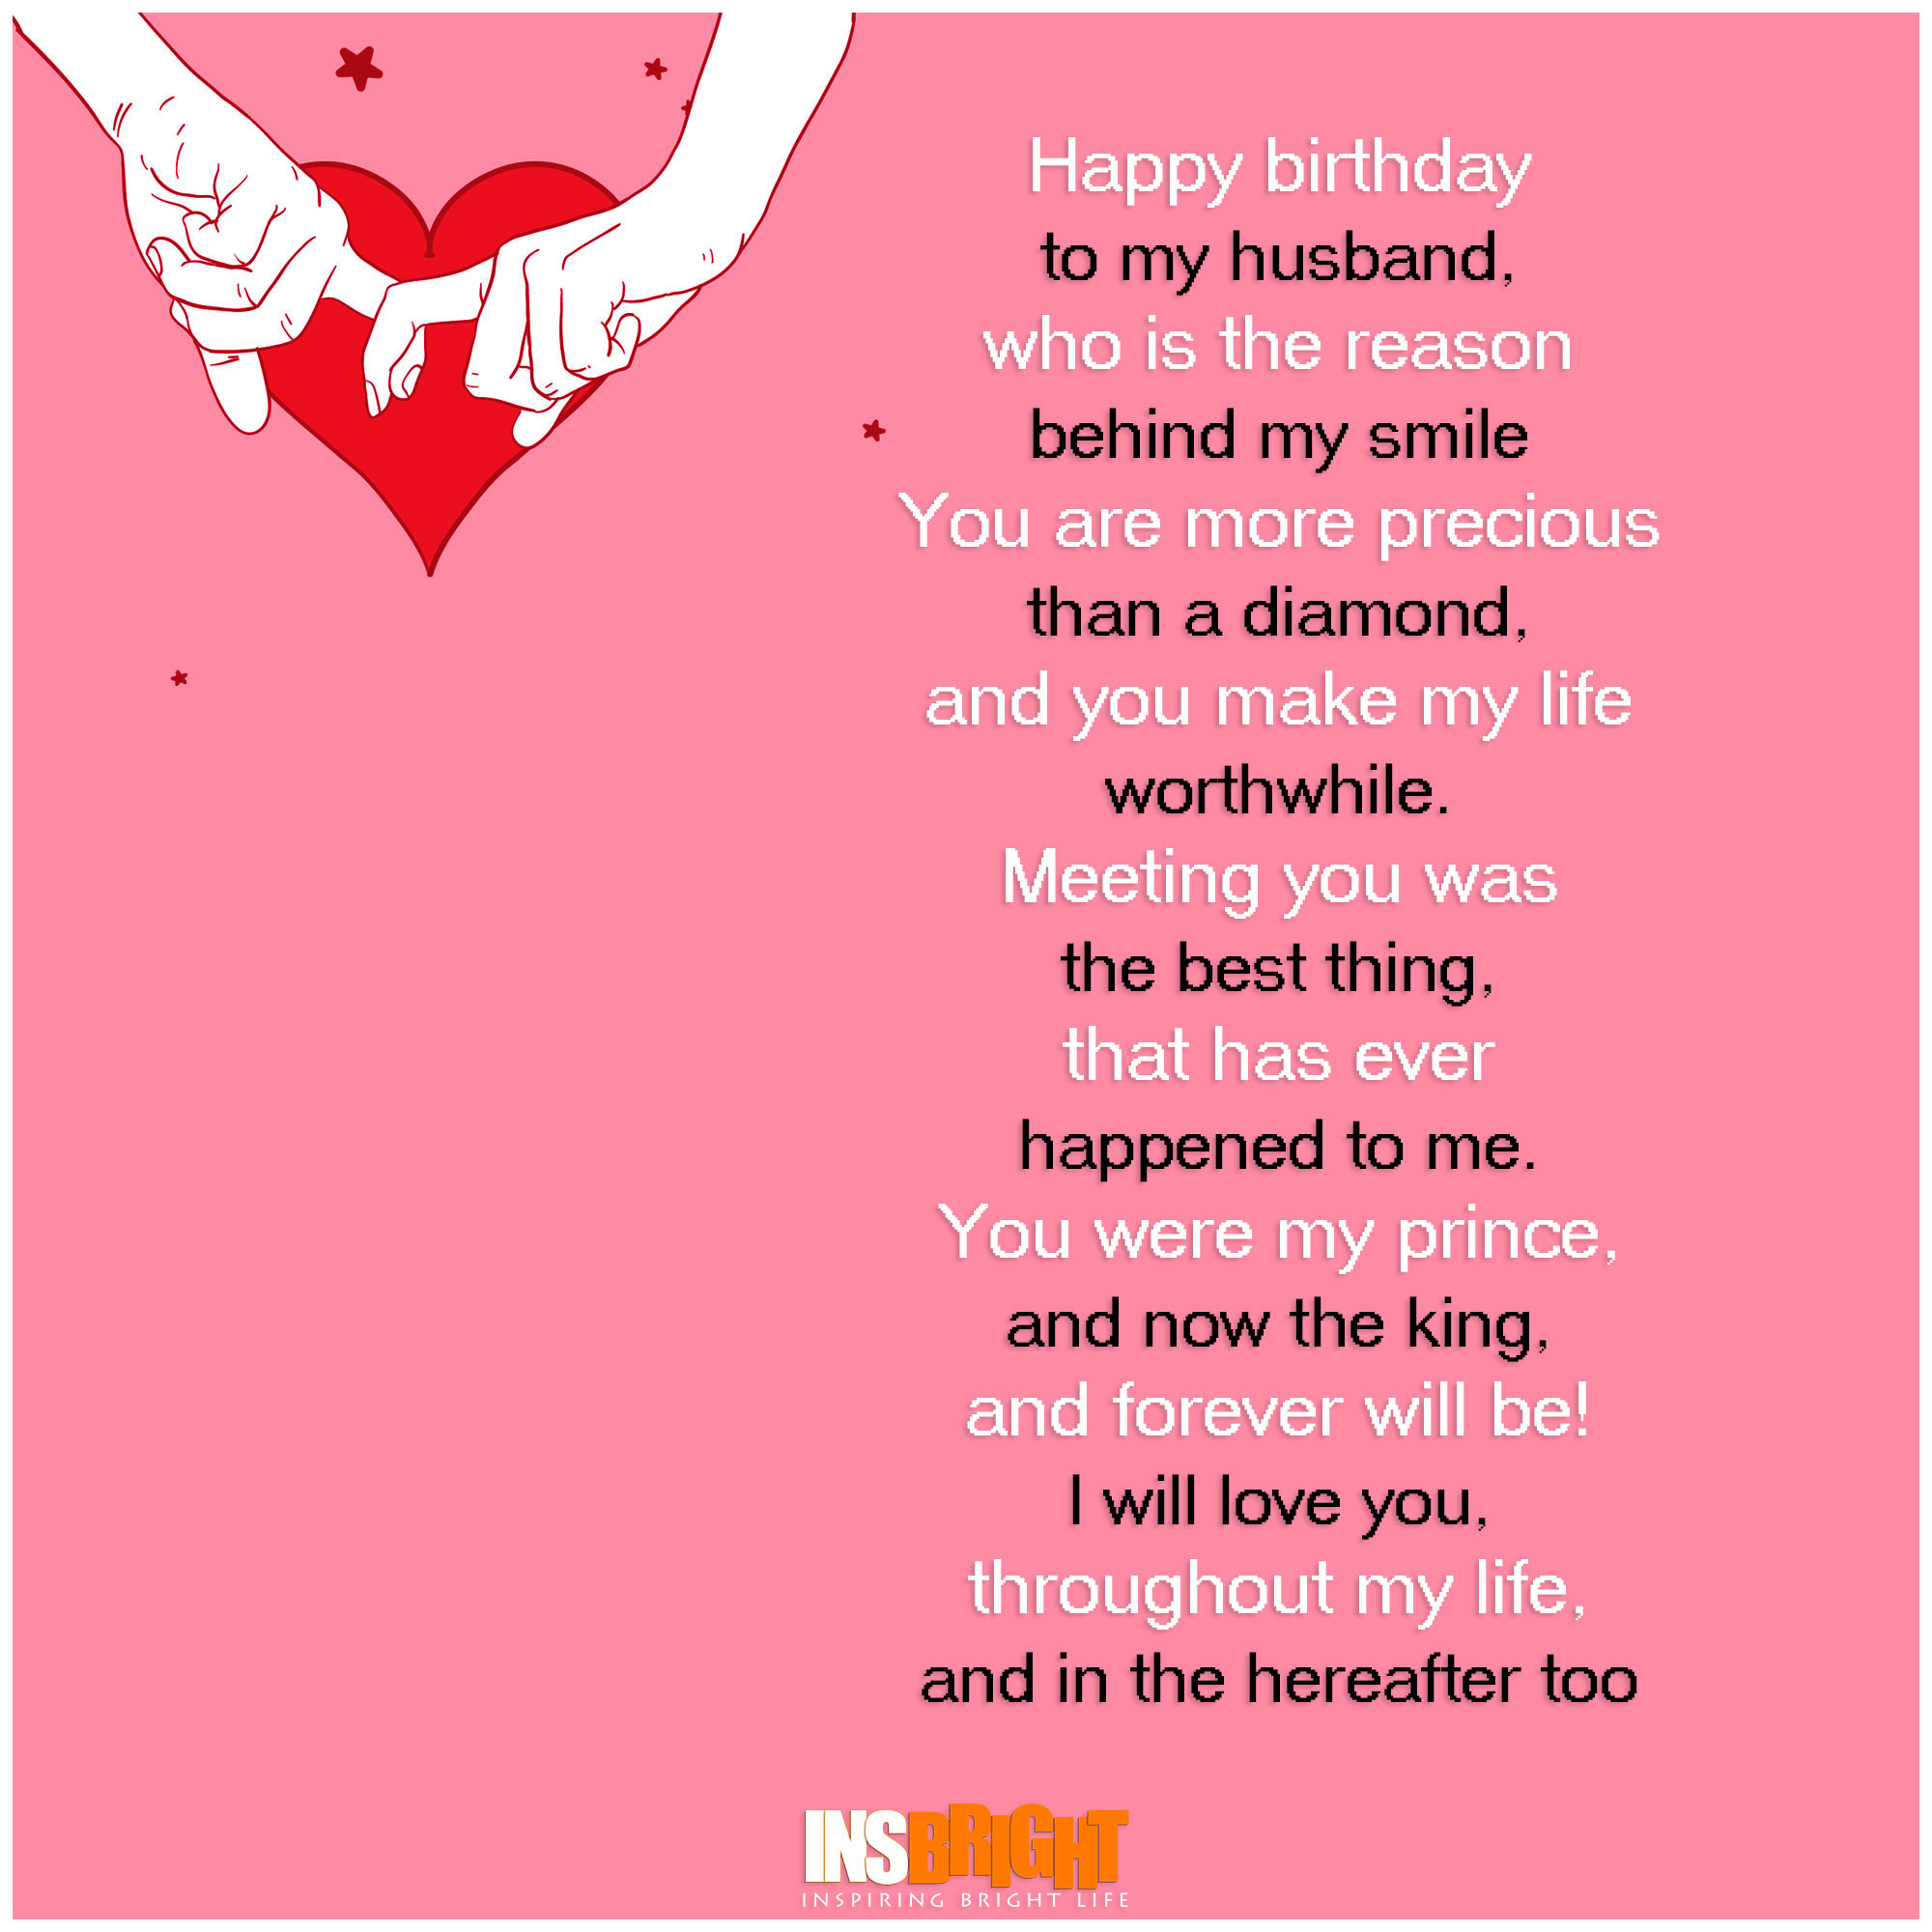 Funny Birthday Poems For Her
 Romantic Happy Birthday Poems For Husband From Wife